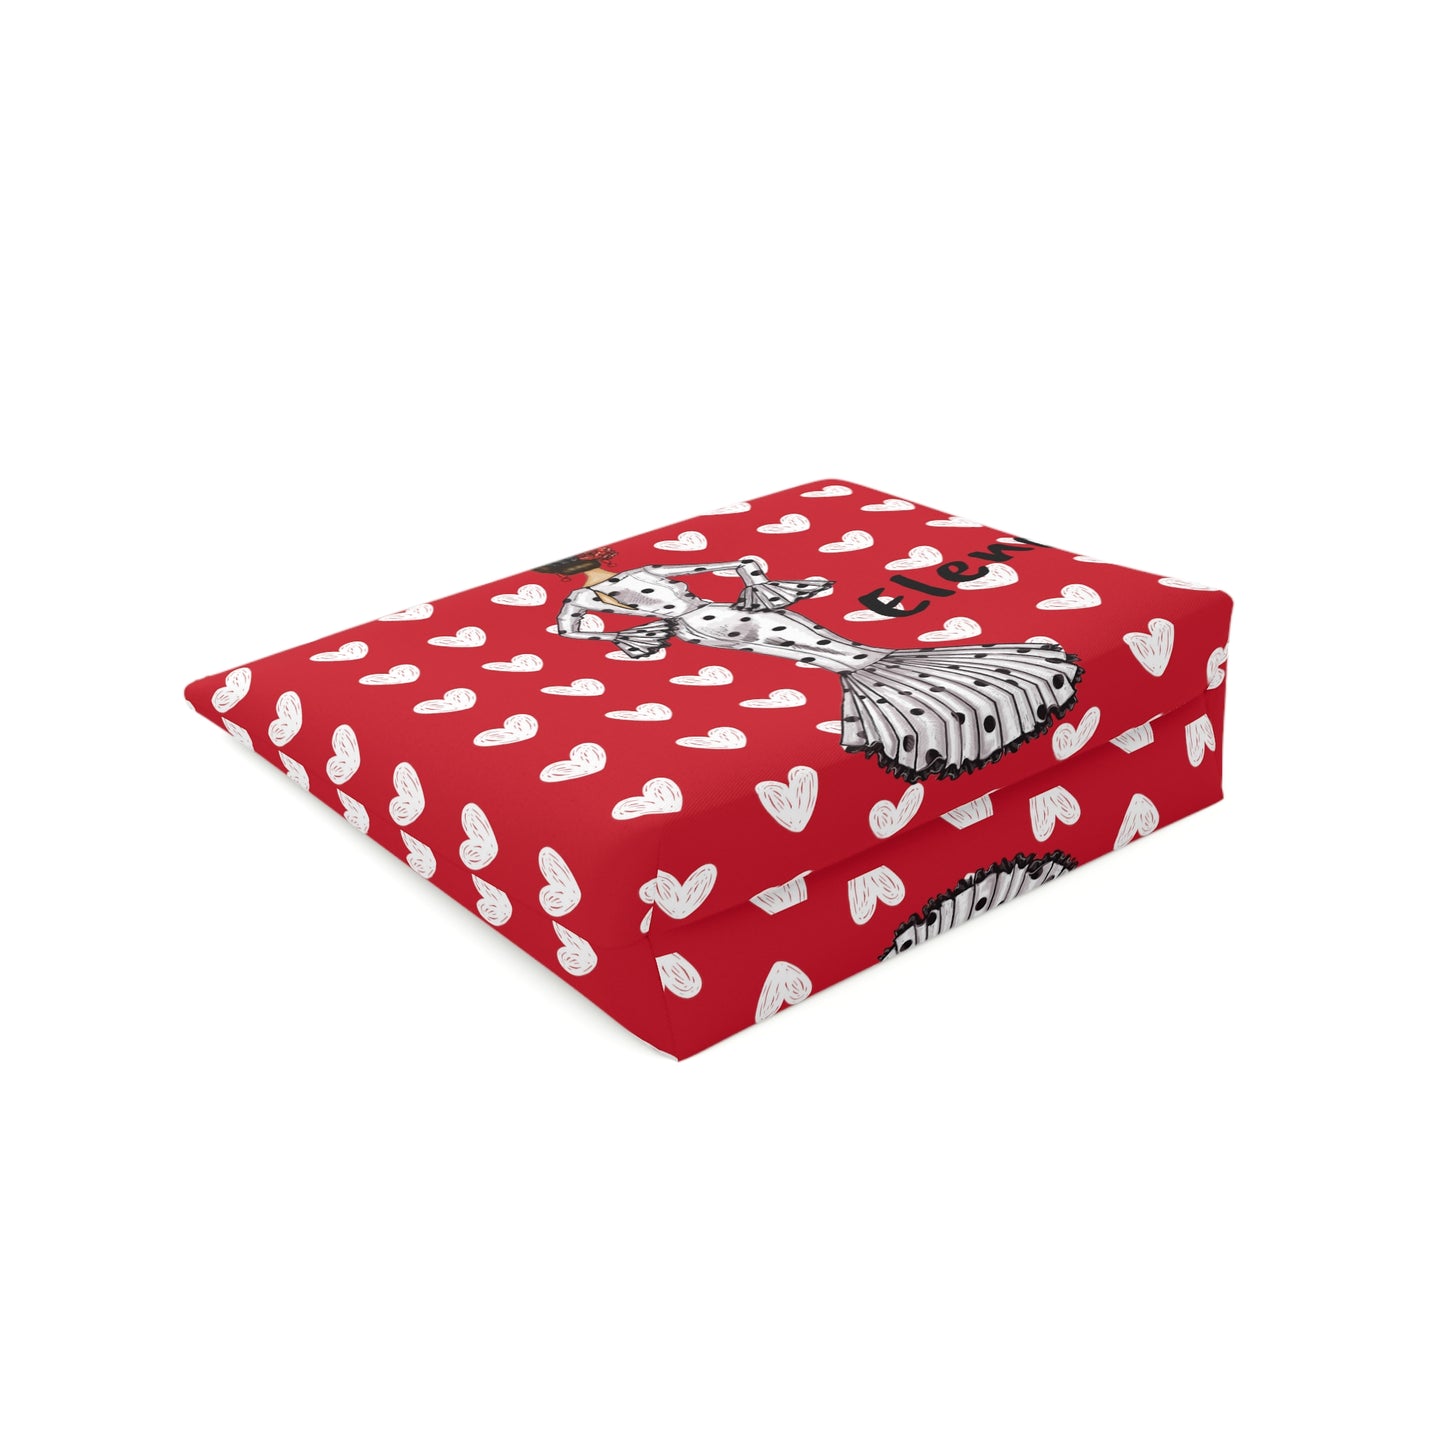 a red blanket with white hearts and a zebra on it